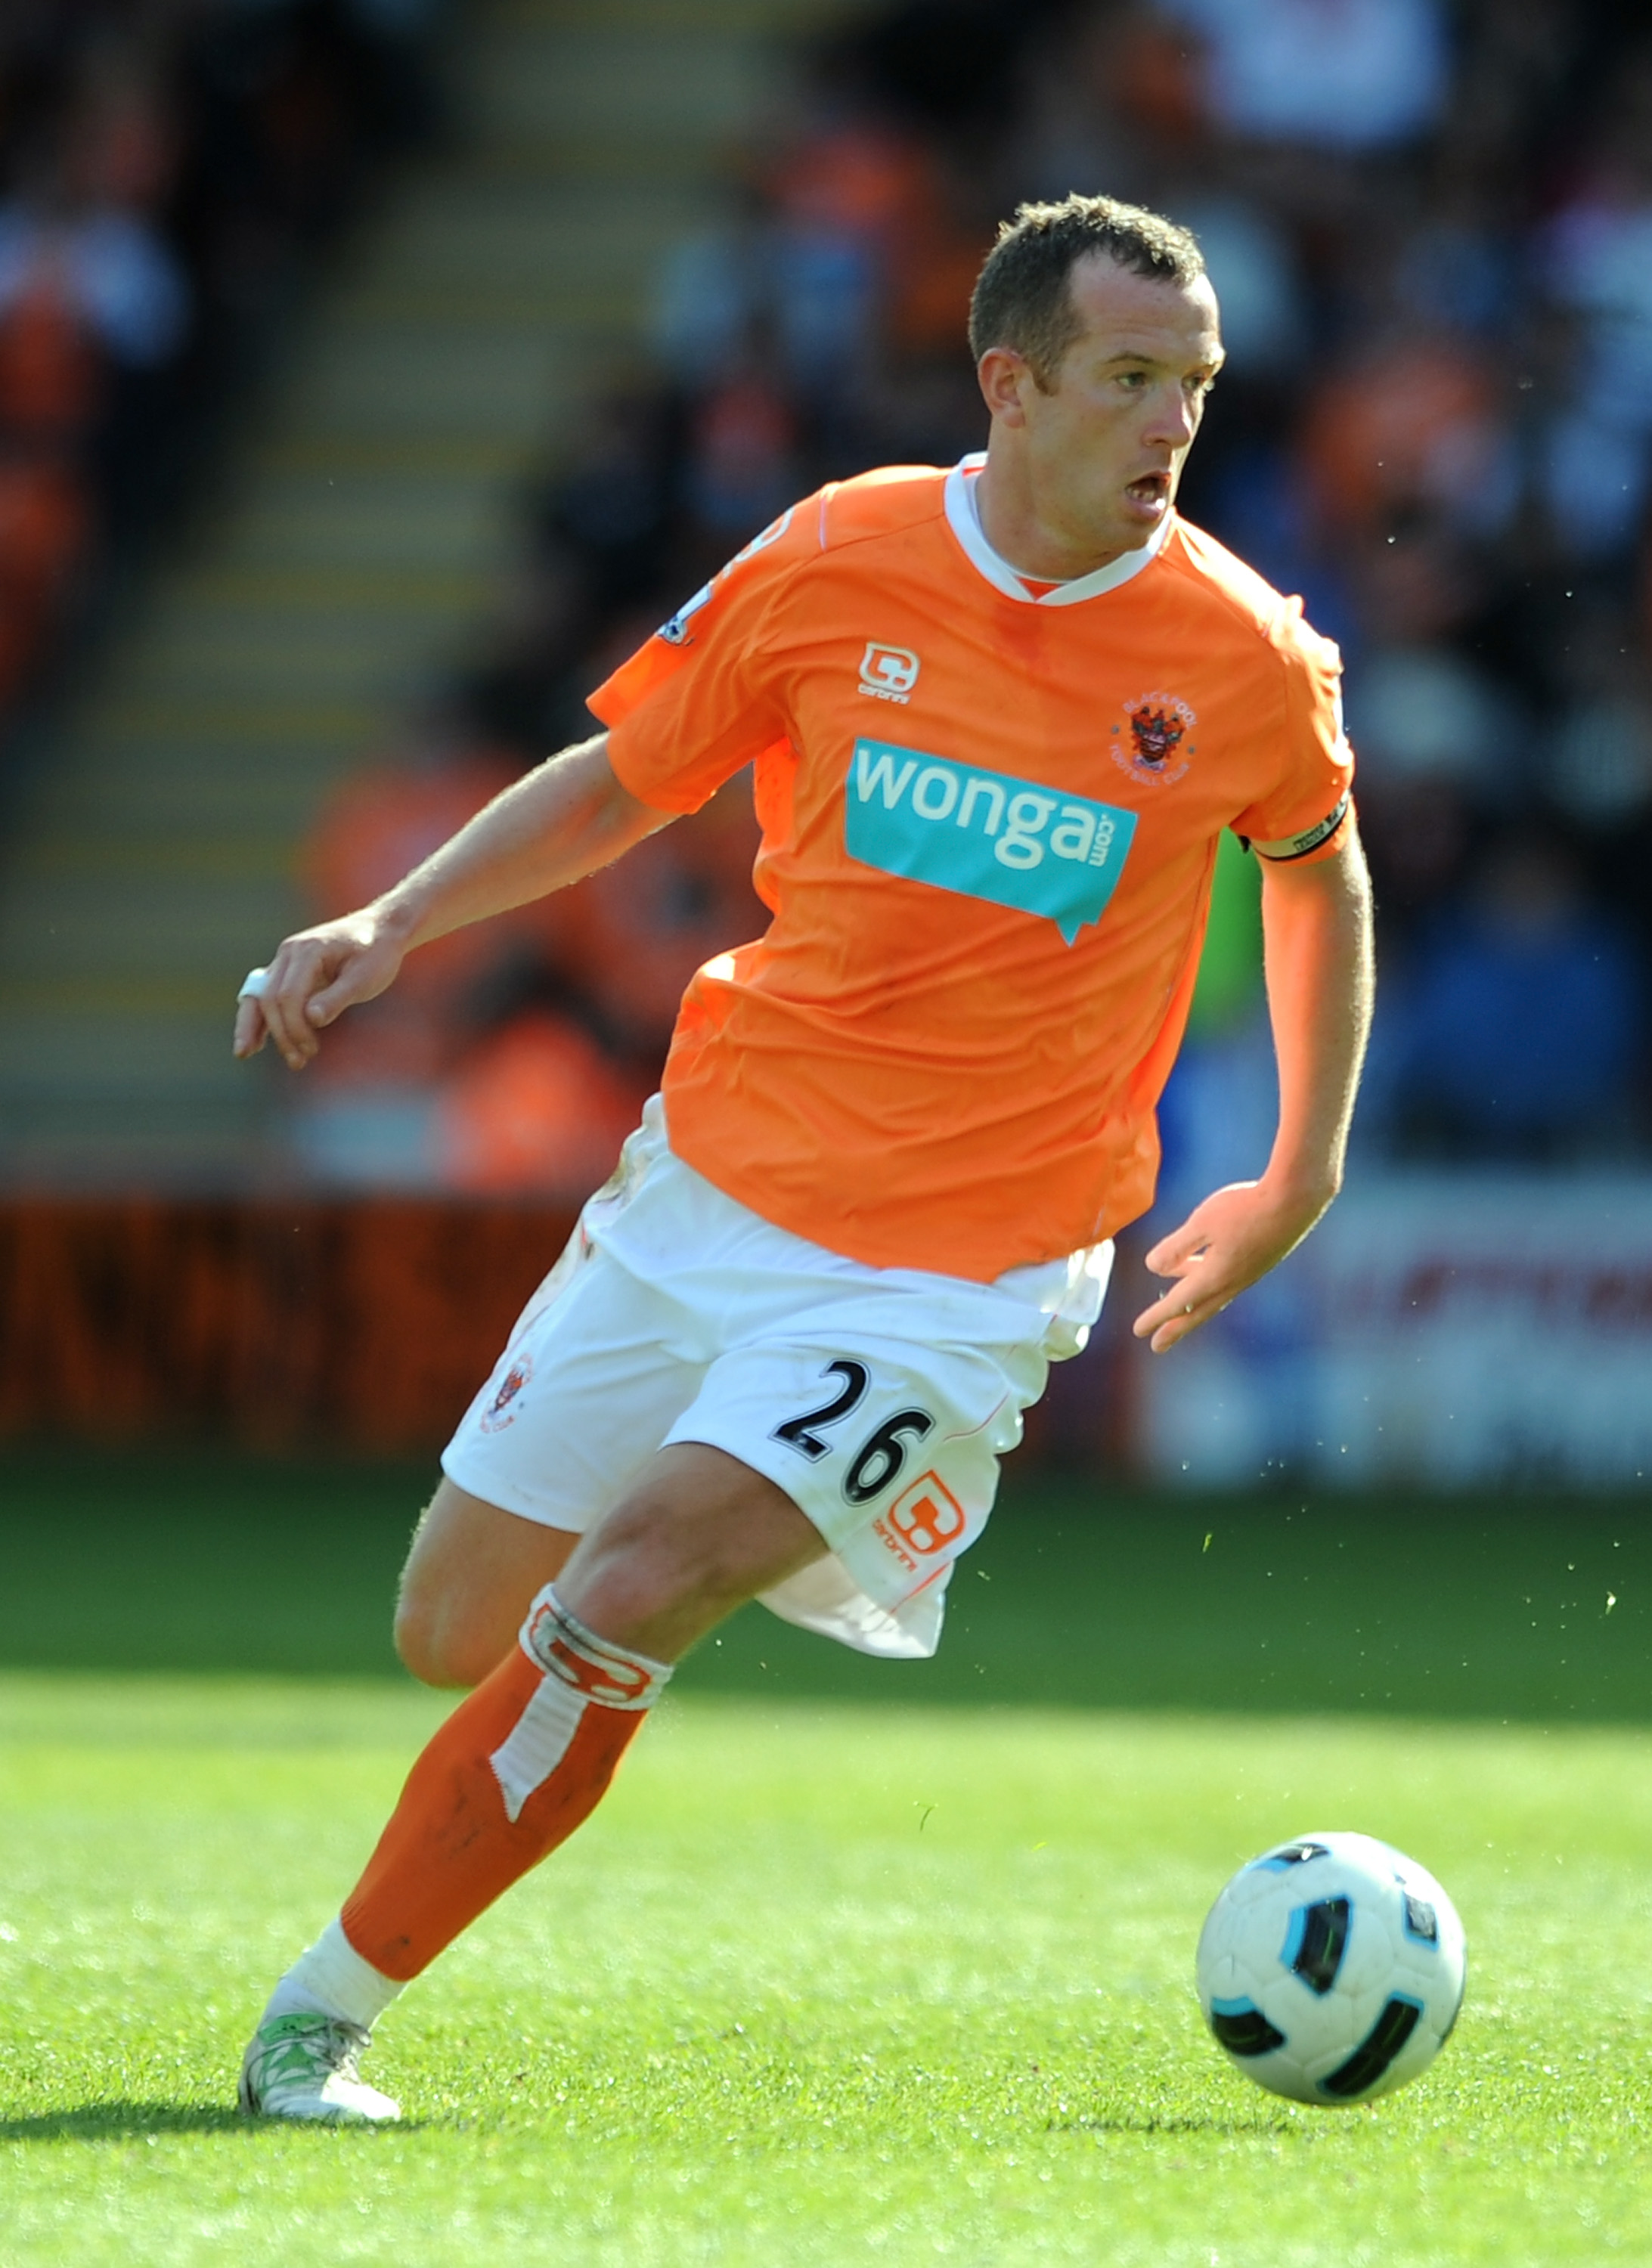 BLACKPOOL, ENGLAND - APRIL 16:  Charlie Adam of Blackpool in action during the Barclays Premier League match between Blackpool and Wigan Athletic at Bloomfield Road on April 16, 2011 in Blackpool, England.  (Photo by Chris Brunskill/Getty Images)